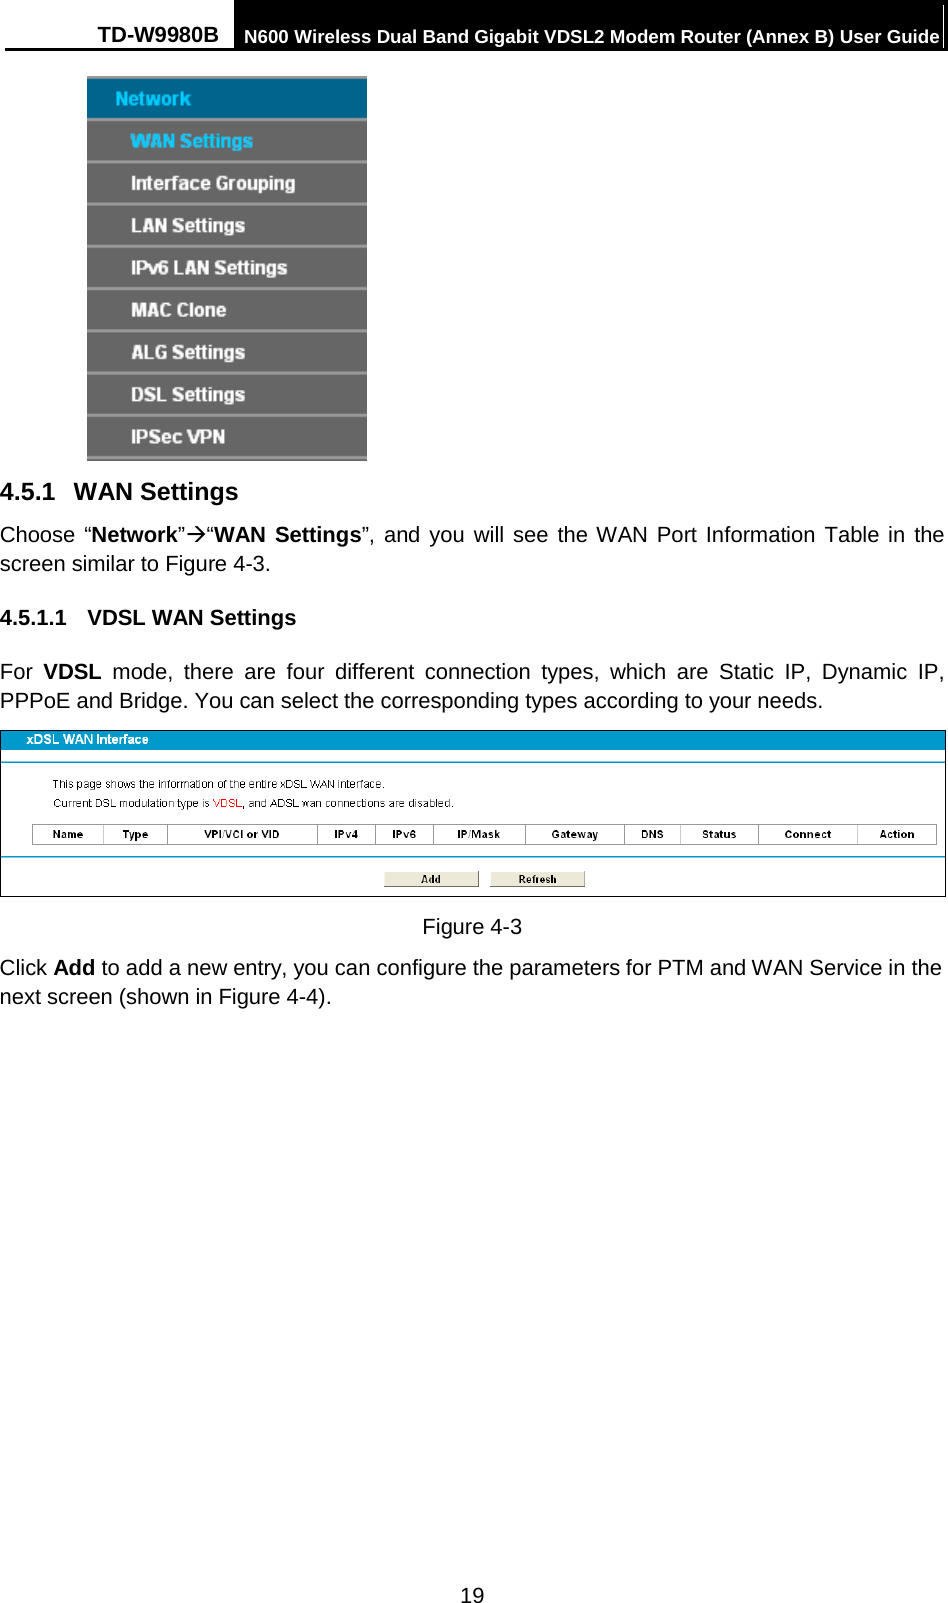 TD-W9980B N600 Wireless Dual Band Gigabit VDSL2 Modem Router (Annex B) User Guide   4.5.1 WAN Settings Choose “Network”“WAN Settings”, and you will see the WAN Port Information Table in the screen similar to Figure 4-3.   4.5.1.1  VDSL WAN Settings For  VDSL mode, there are four different connection types, which are Static IP,  Dynamic IP, PPPoE and Bridge. You can select the corresponding types according to your needs.    Figure 4-3 Click Add to add a new entry, you can configure the parameters for PTM and WAN Service in the next screen (shown in Figure 4-4). 19 